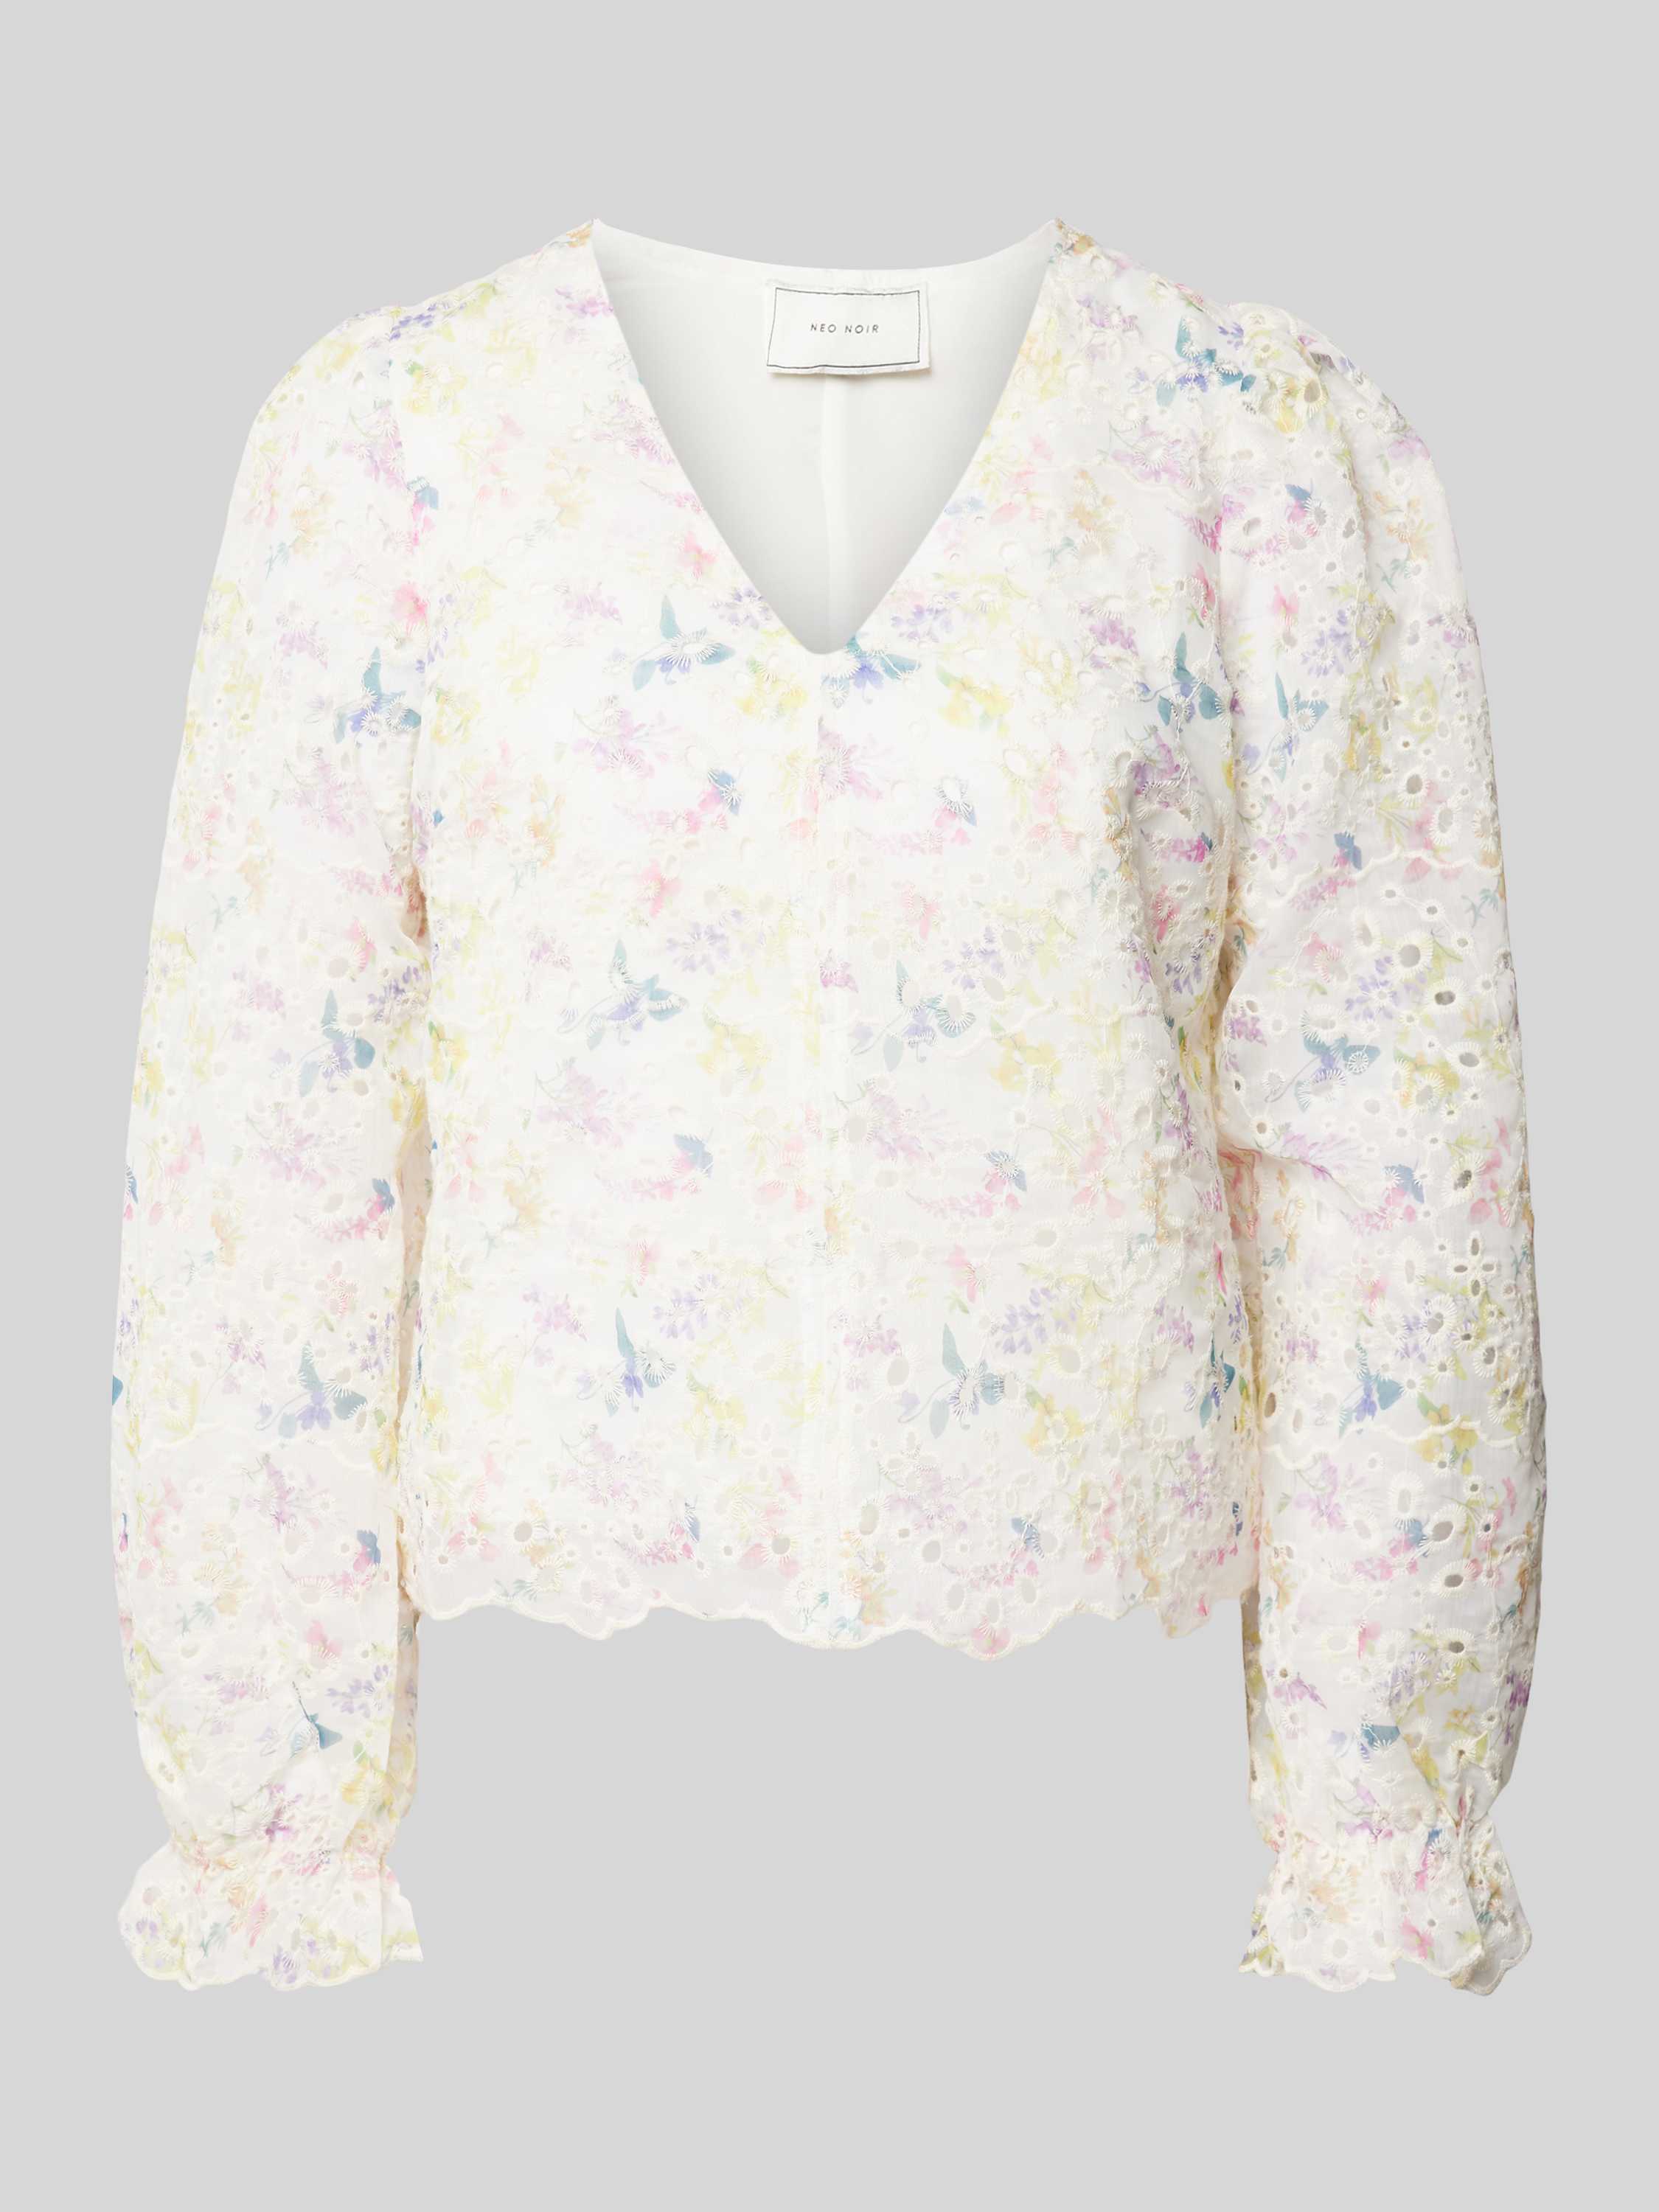 NEO NOIR Blouse met broderie anglaise model 'Candice'